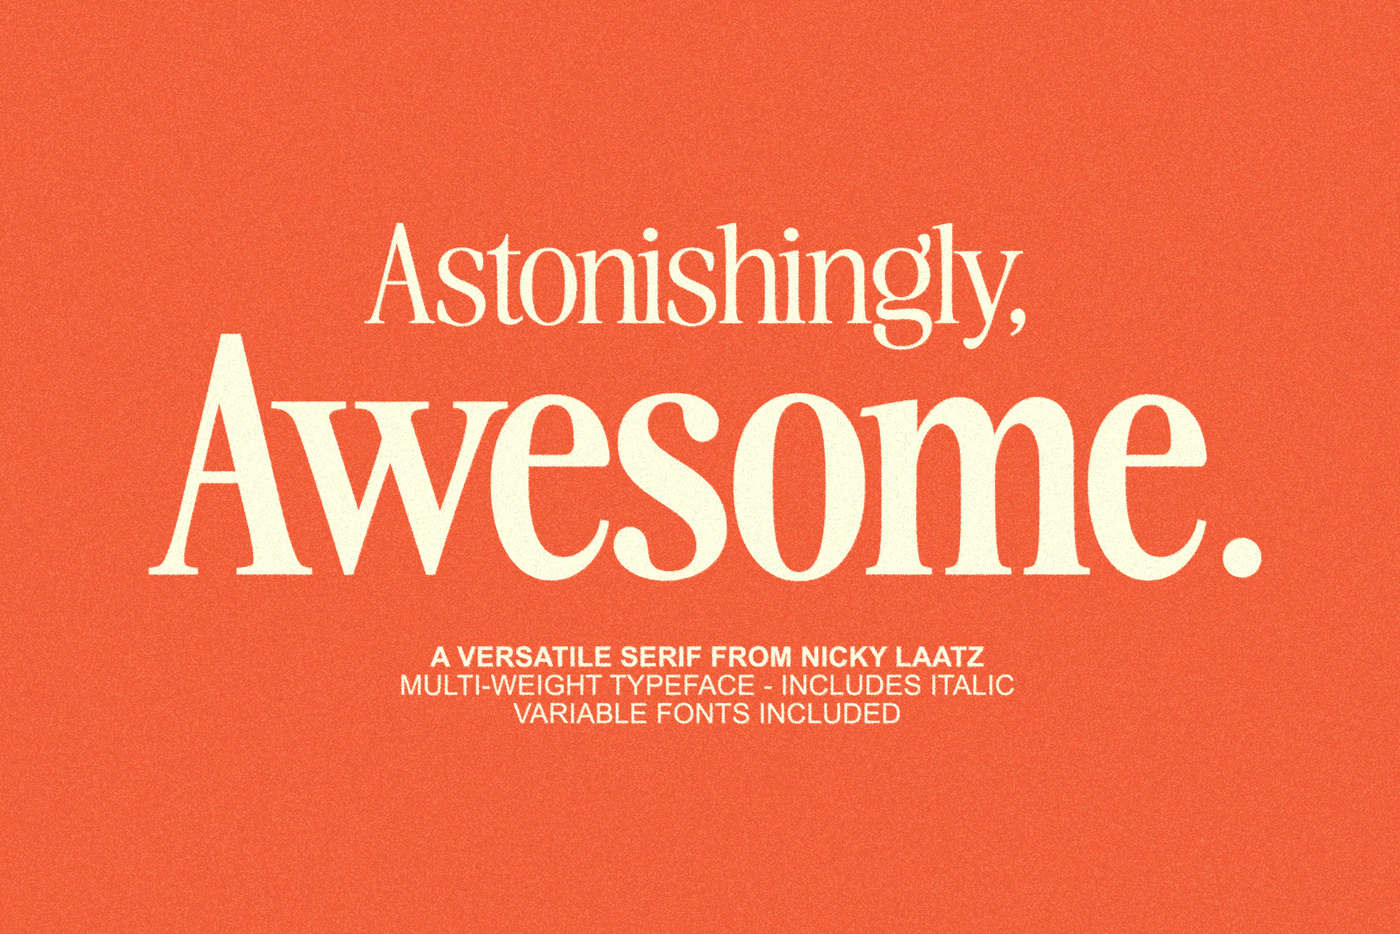 Awesome Serif Family main product image by Nicky Laatz